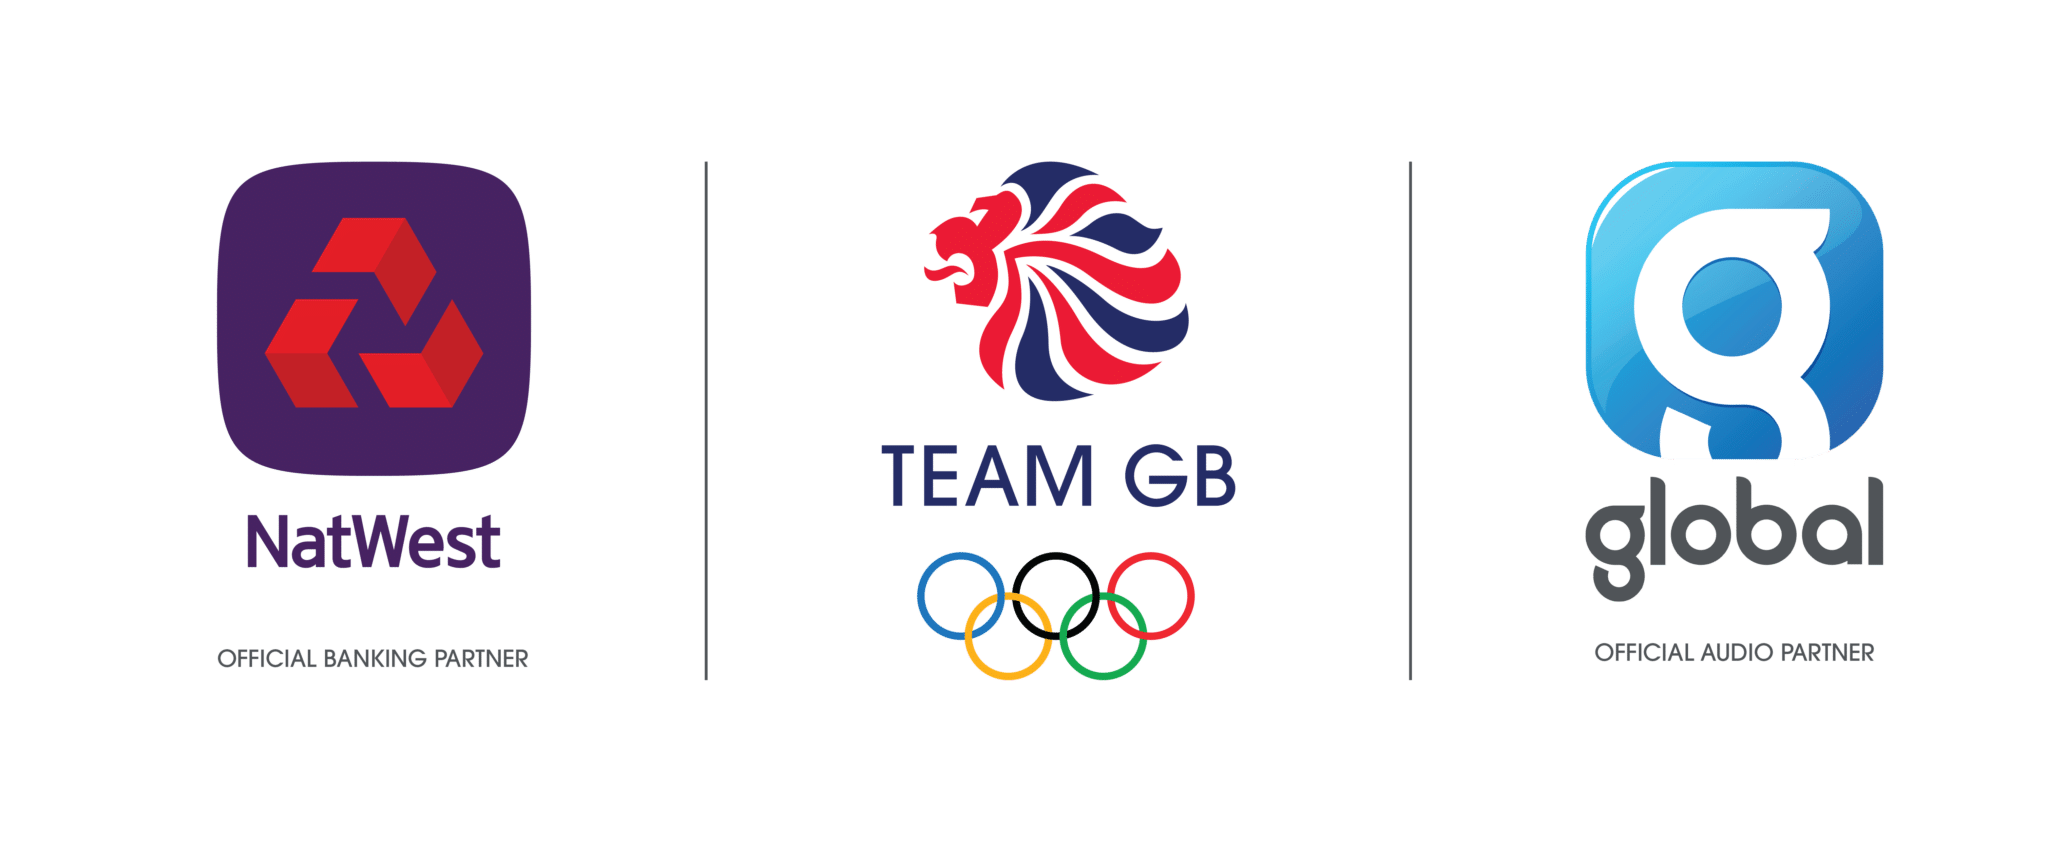 Global announced as the official audio partner of Team GB at Paris 2024 Olympic Games